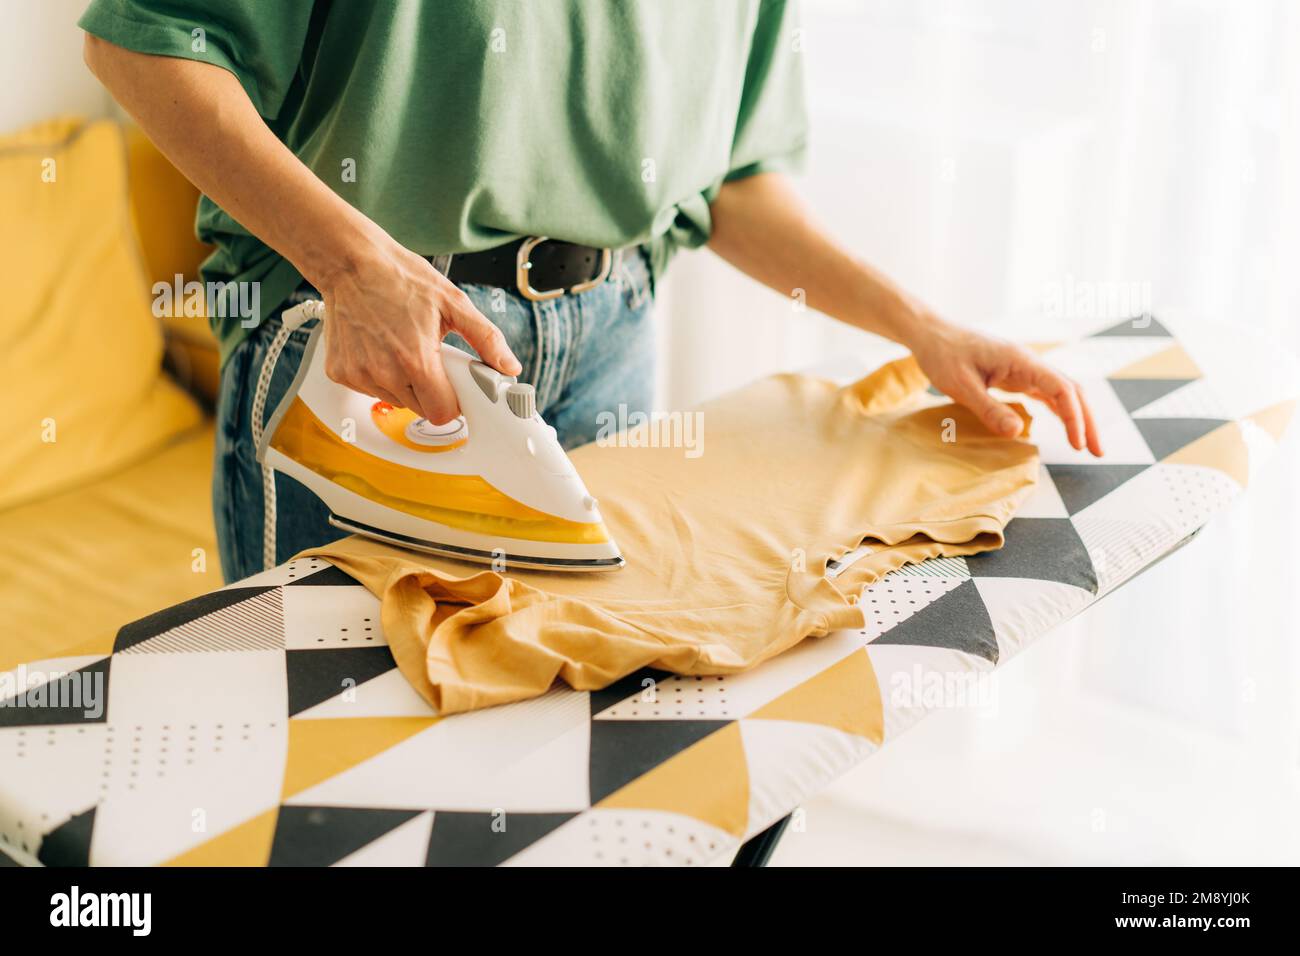 Close-up of an unrecognizable woman ironing linen on an ironing board. Stock Photo